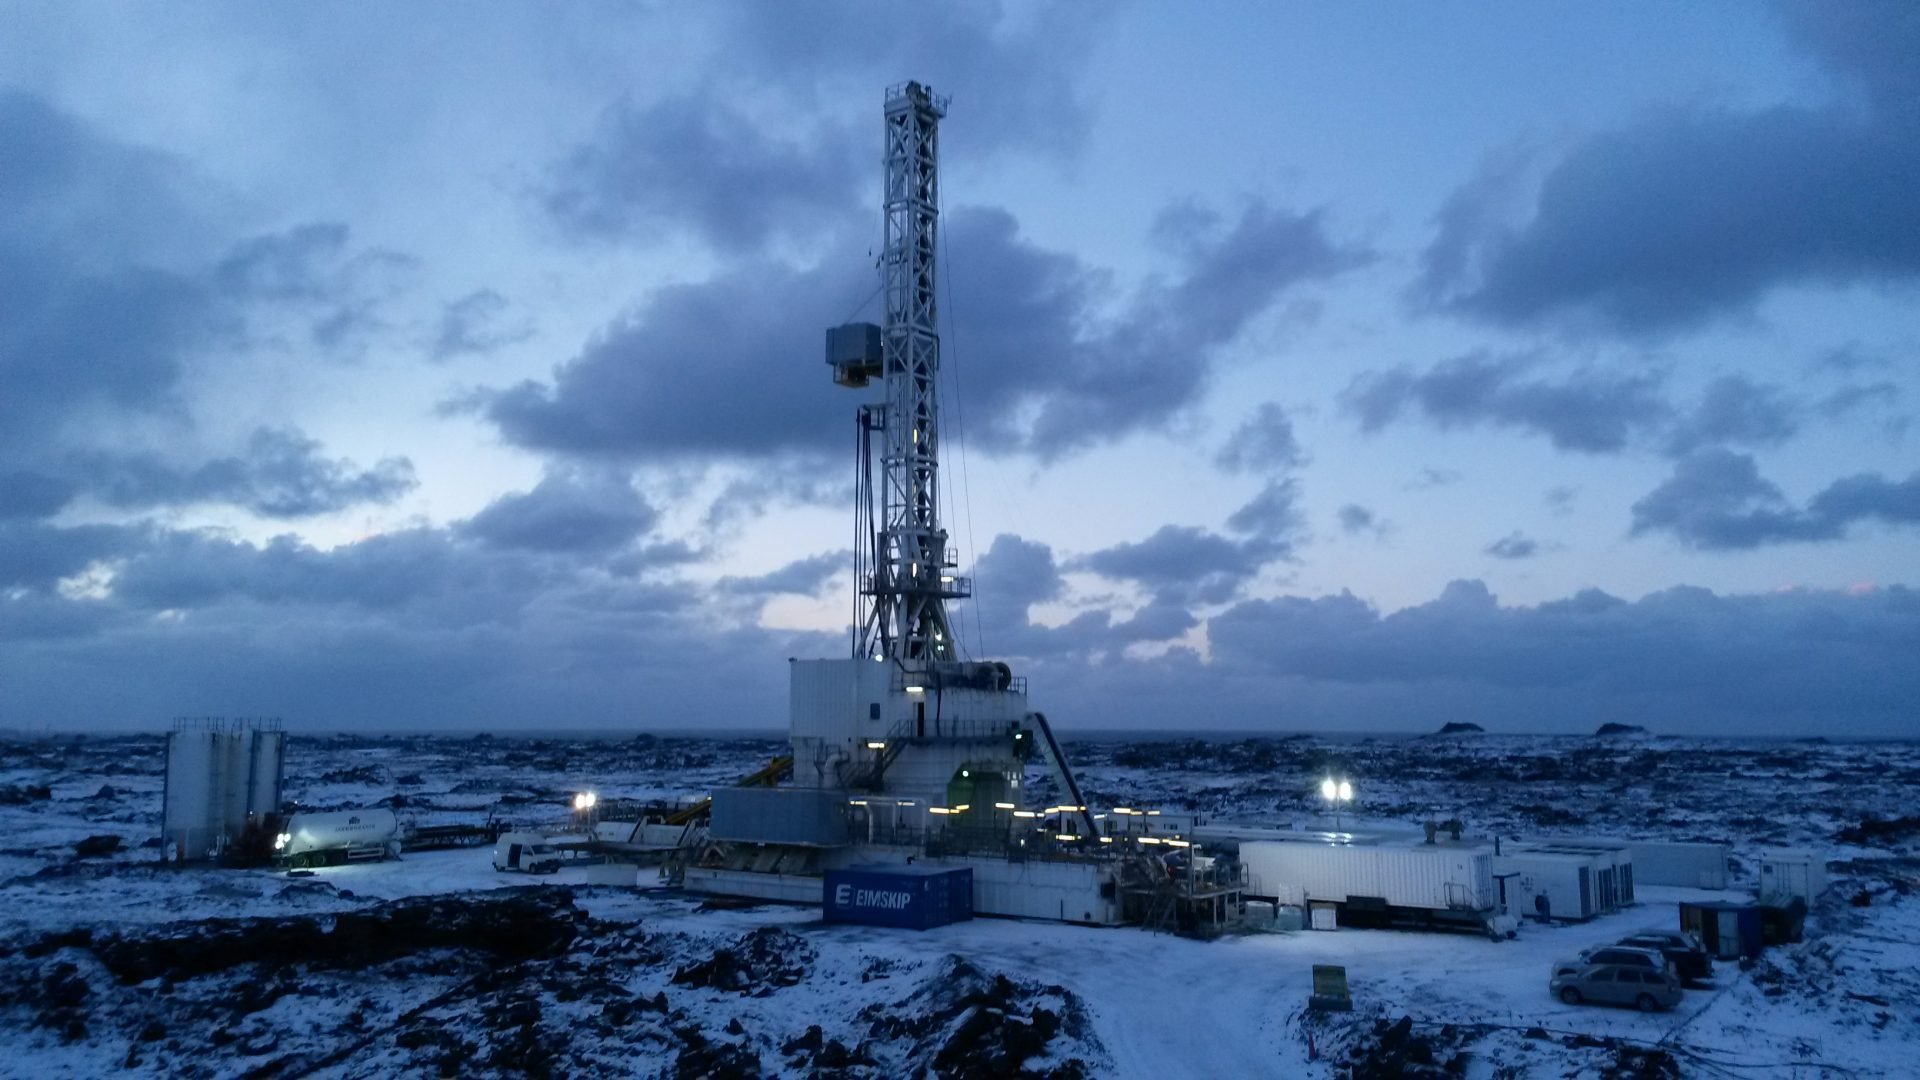 ADC Energy Ltd. Geothermal Rig in Iceland 2